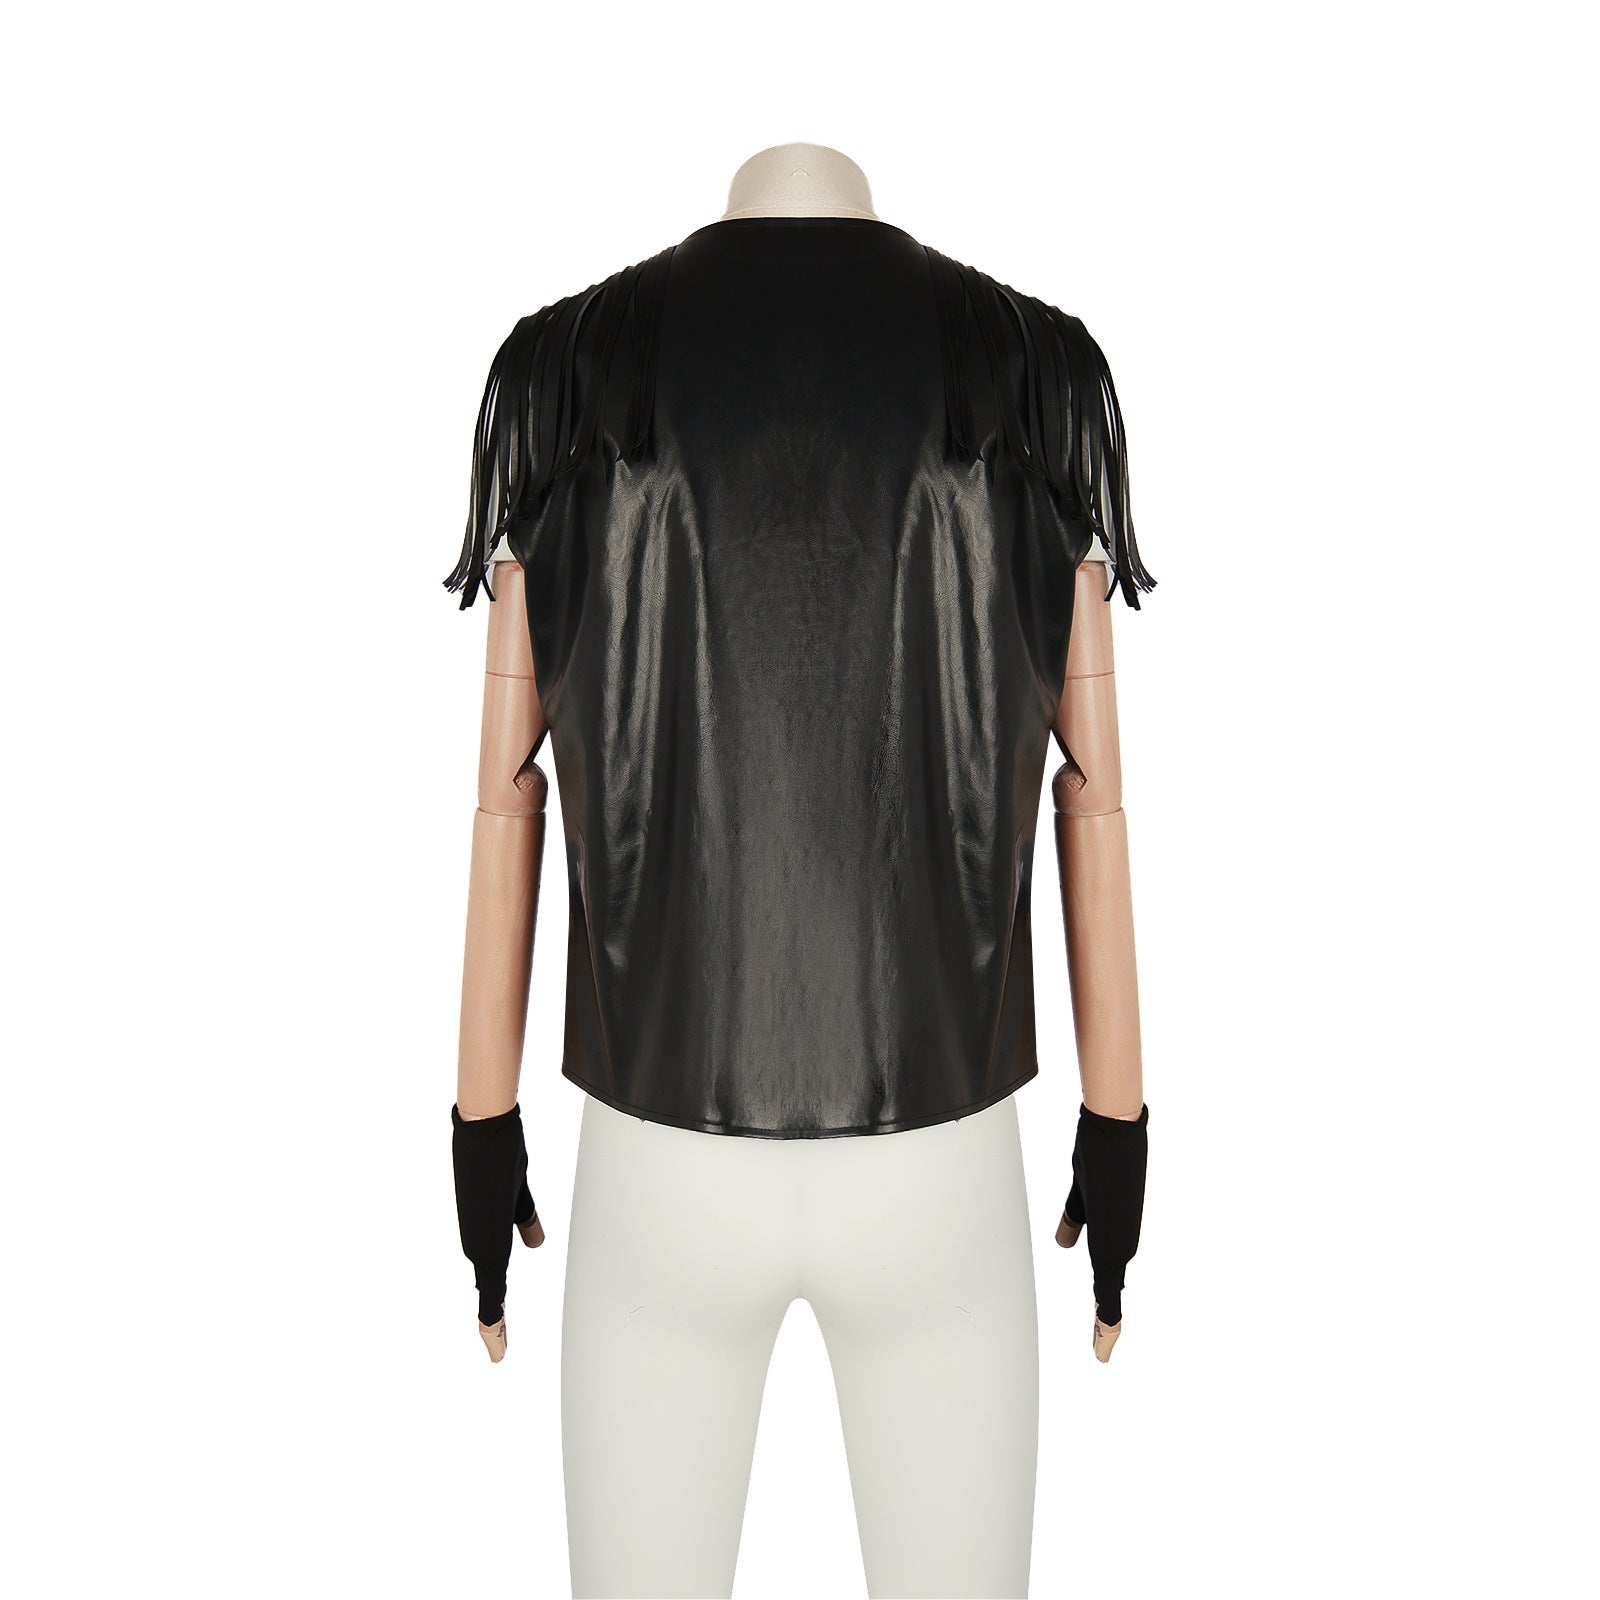 A mannequin dressed in a black sleeveless leather top with fringed shoulder details, black gloves, and white pants, viewed from the back—exuding an edgy Harajuku style reminiscent of game animation role-playing characters is wearing the European Retro Vest For Men by Maramalive™.